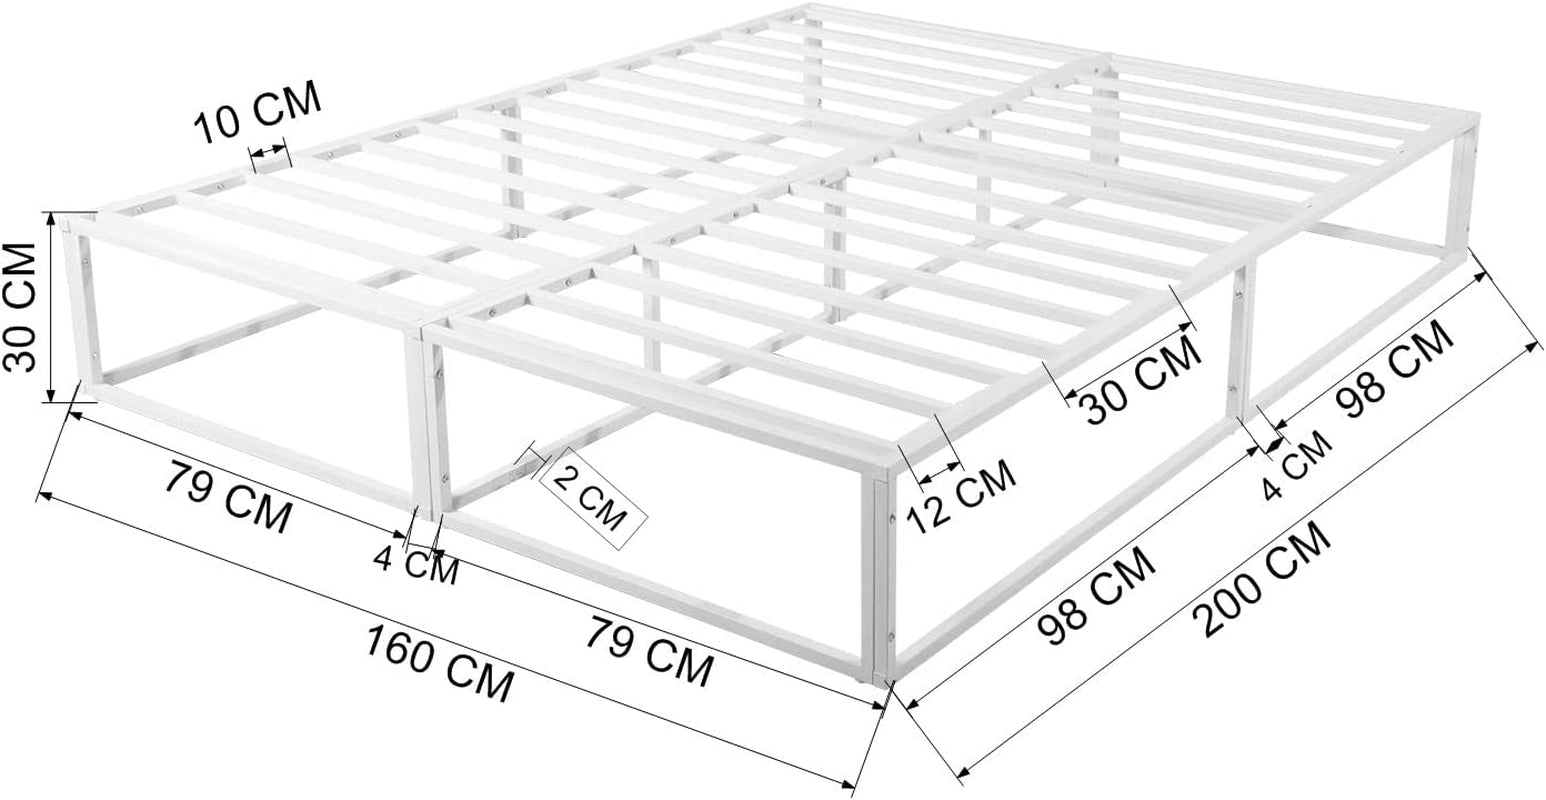 5.25Ft King Size Metal Bed Frame Solid Bedstead Base with Large Storage Space for Adults and Kids, Size 200*160*30Cm, White